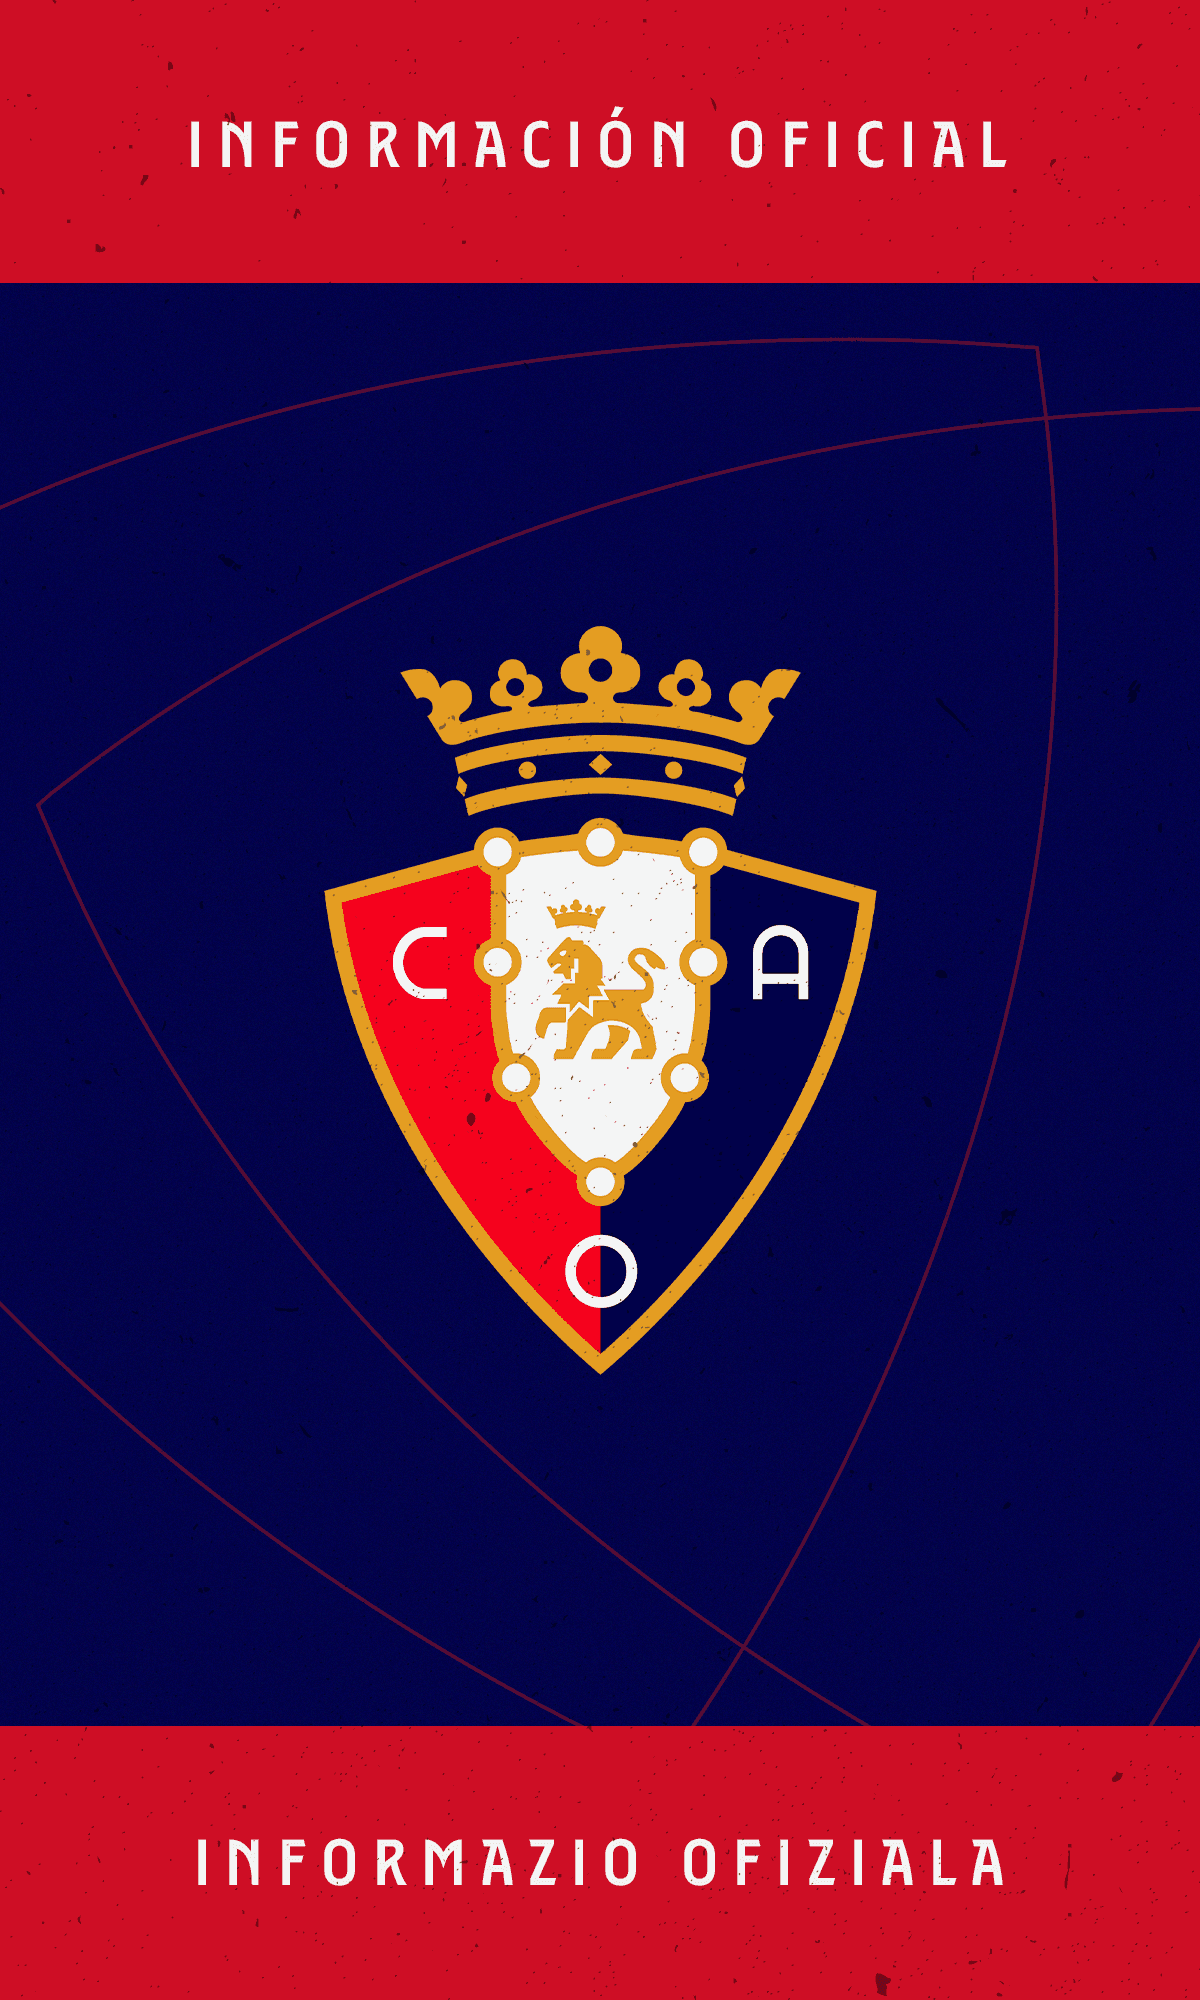 Osasuna joins the Union of European Clubs (UEC) Executive Board for the second consecutive year